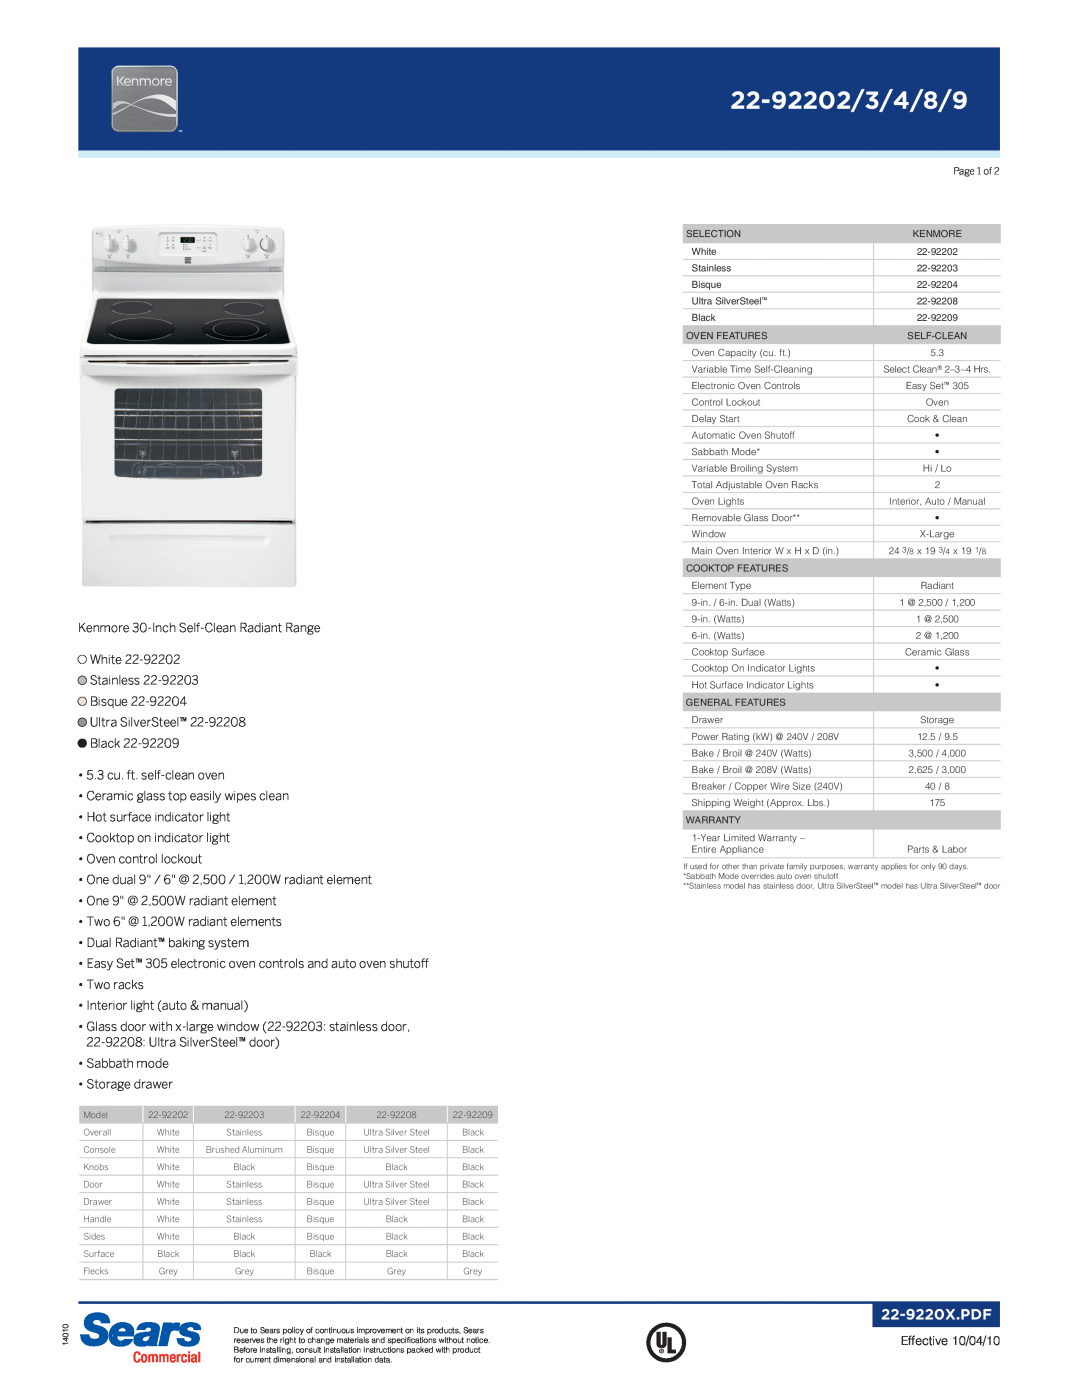 Kenmore 22-92208, 22-92209, 22-92203, 22-92204 specifications 22-92202/3/4/8/9 